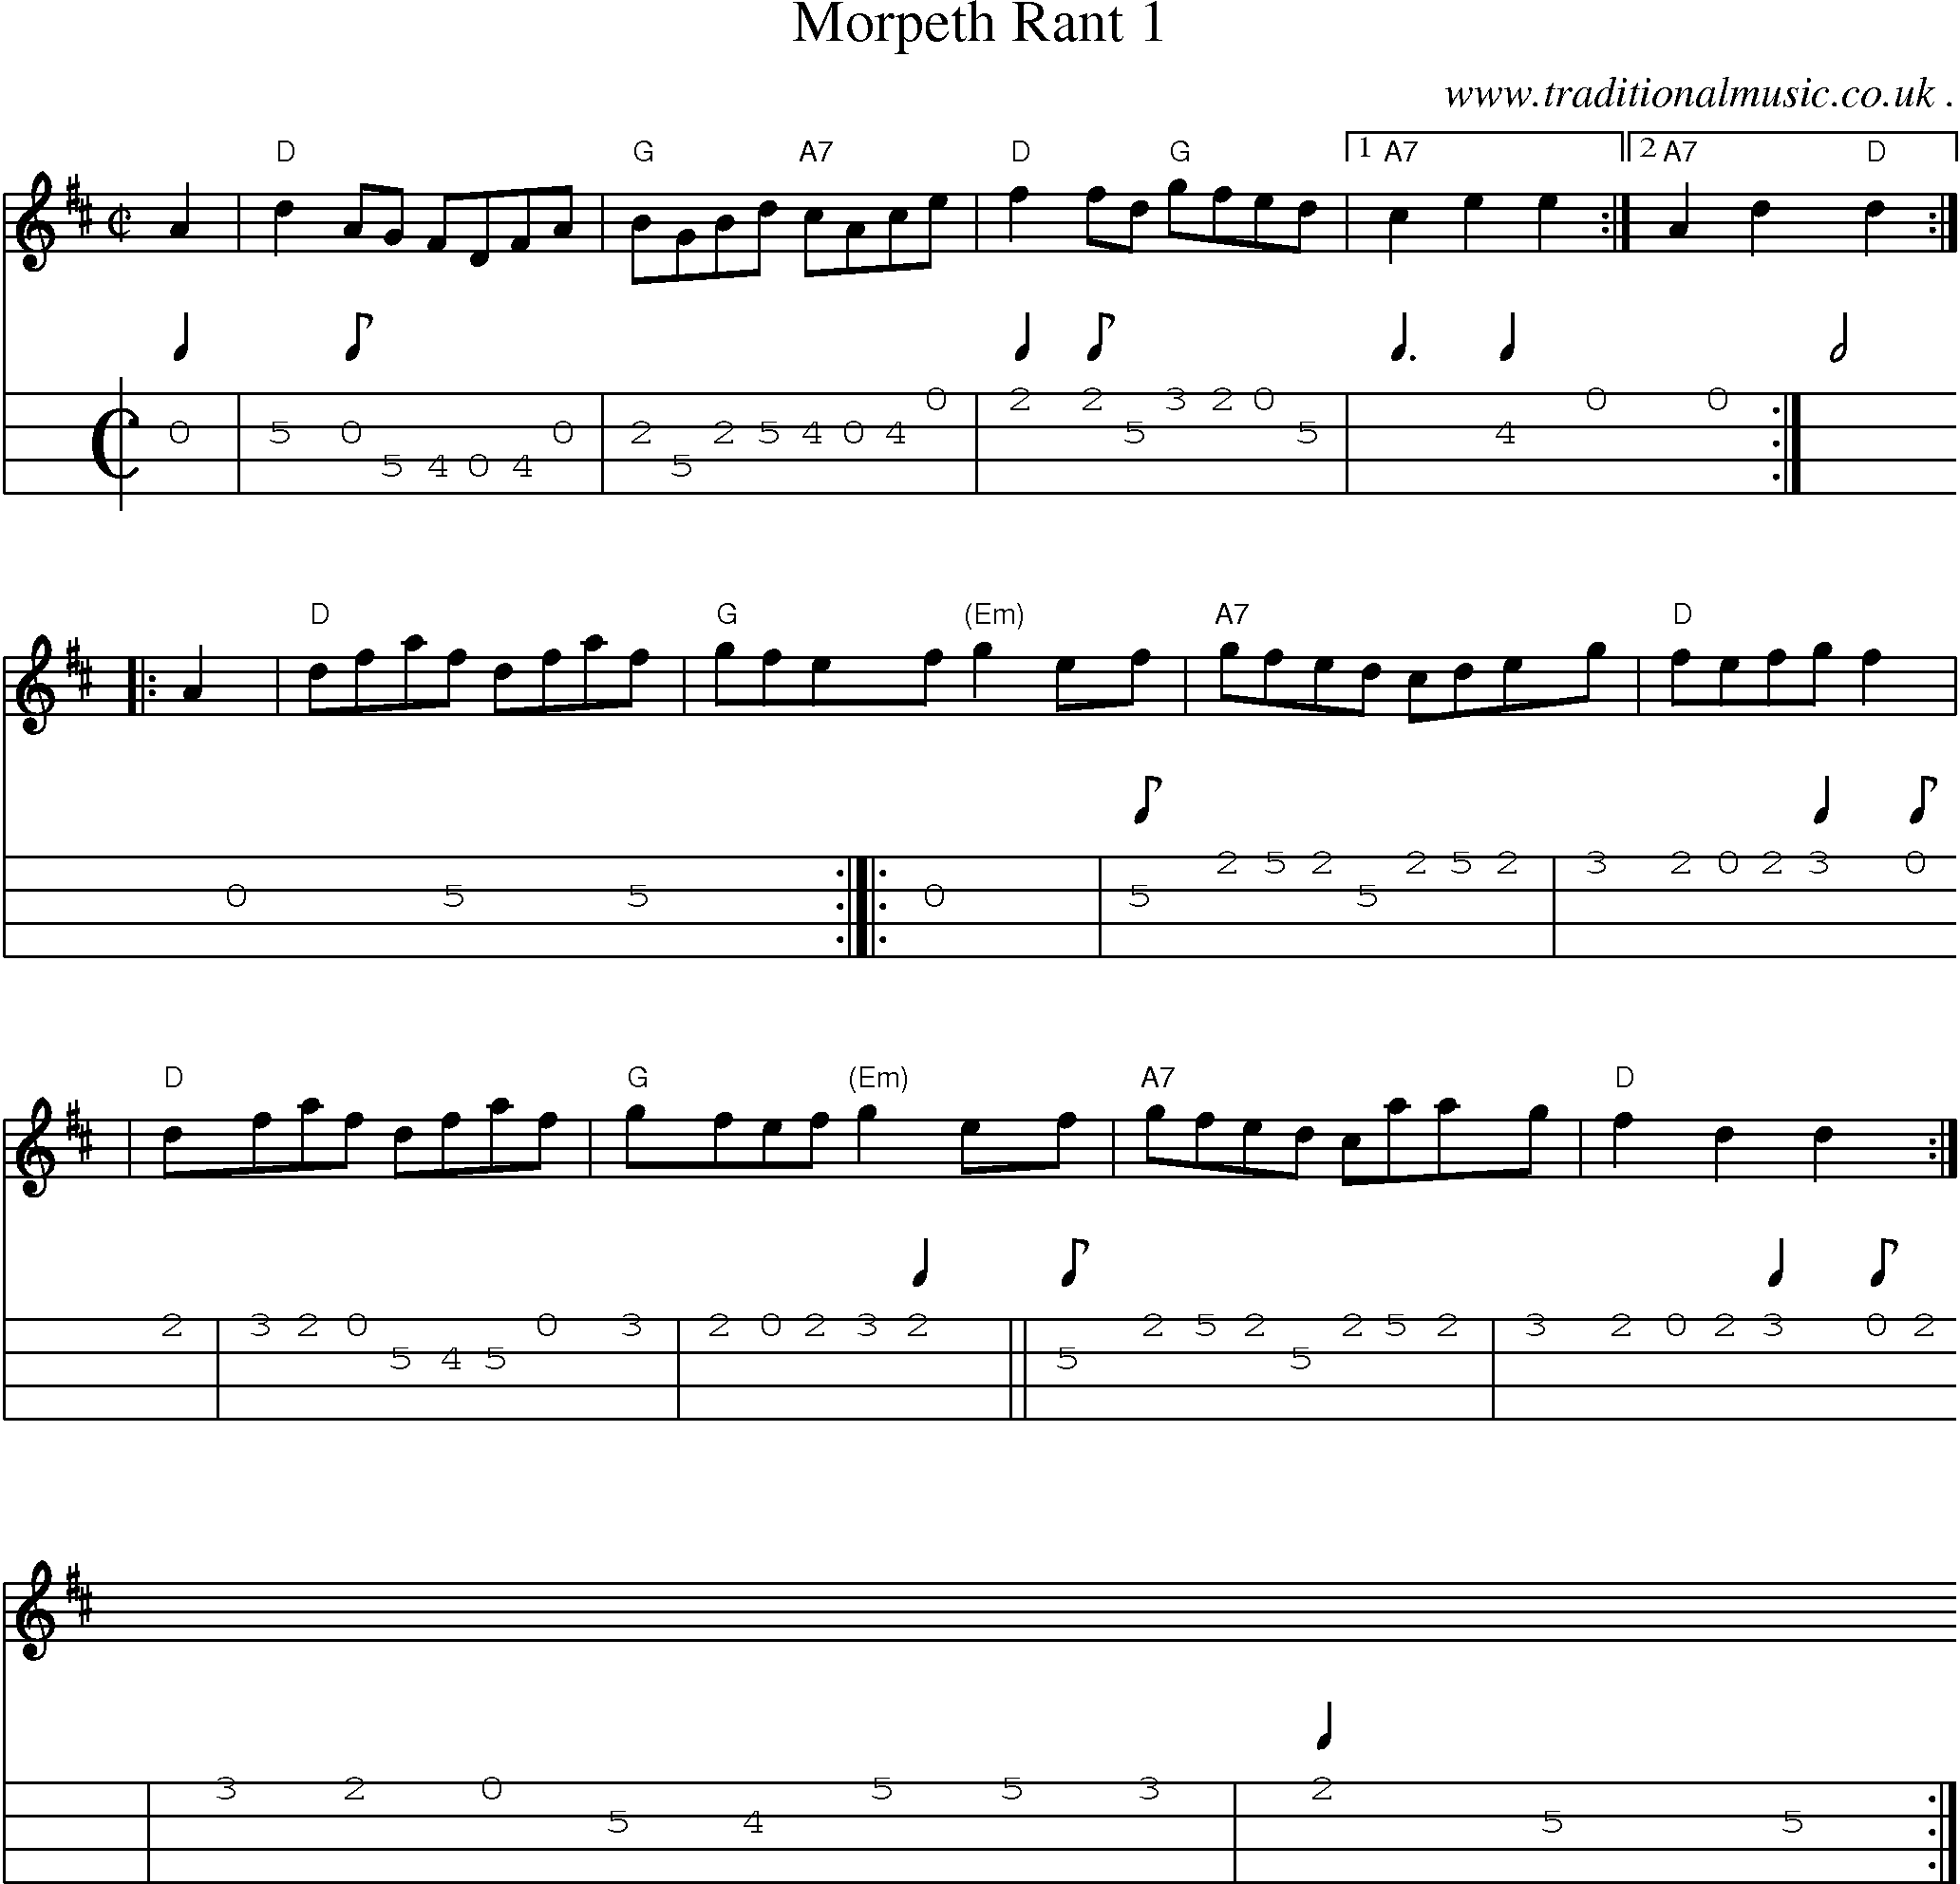 Sheet-music  score, Chords and Mandolin Tabs for Morpeth Rant 1